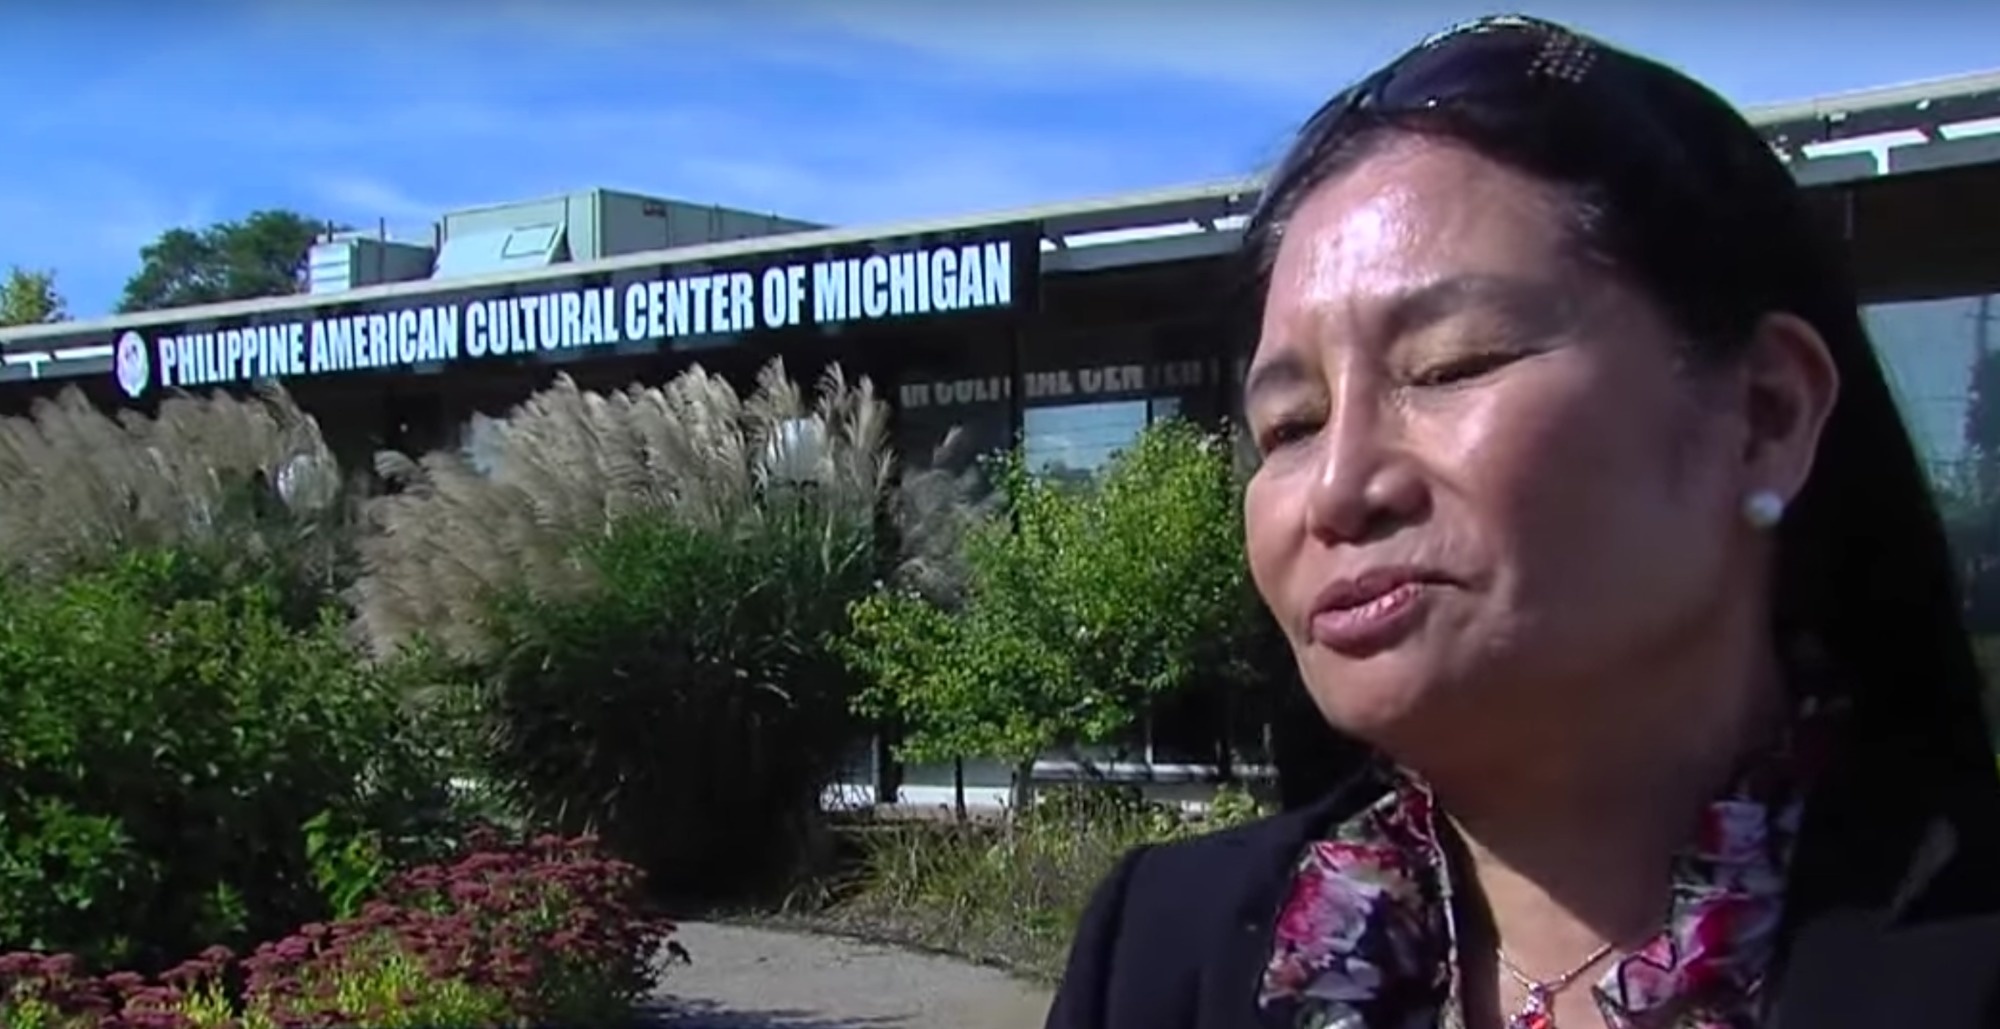 The number on the back of the note went unanswered.

Perez tried calling the number, but there was no answer. Rebecca Tungol, president of the Philippine American Cultural Center of Michigan, suggests that the number was probably from a pre-paid cell phone, which would make it untraceable.